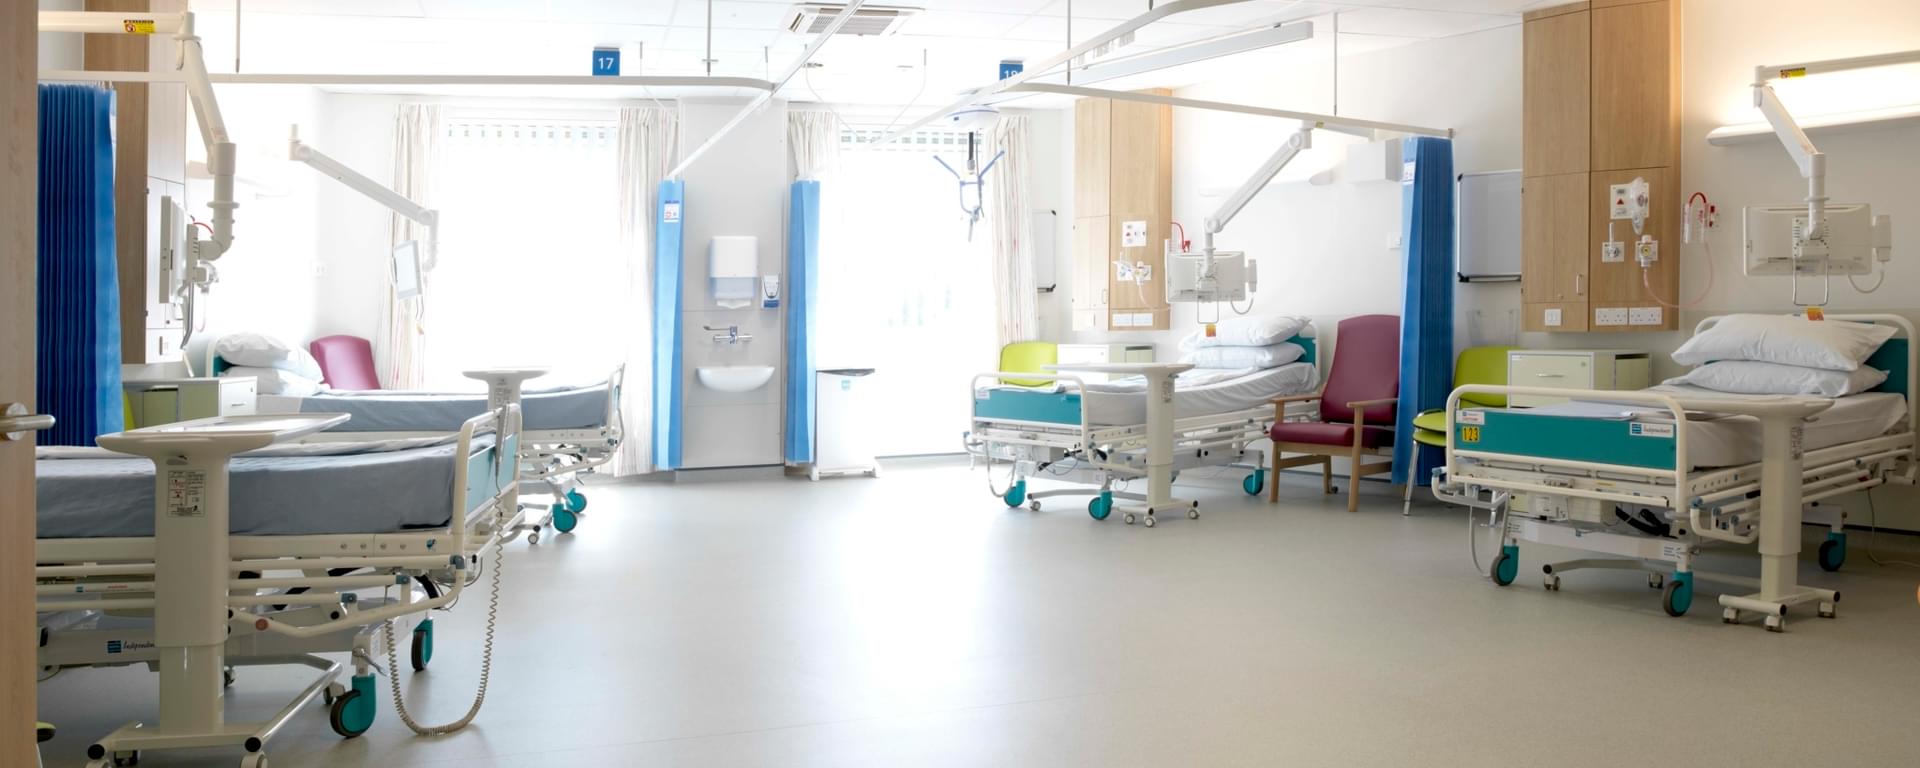 Northumbria Healthcare Specialist Emergency Care Hospital